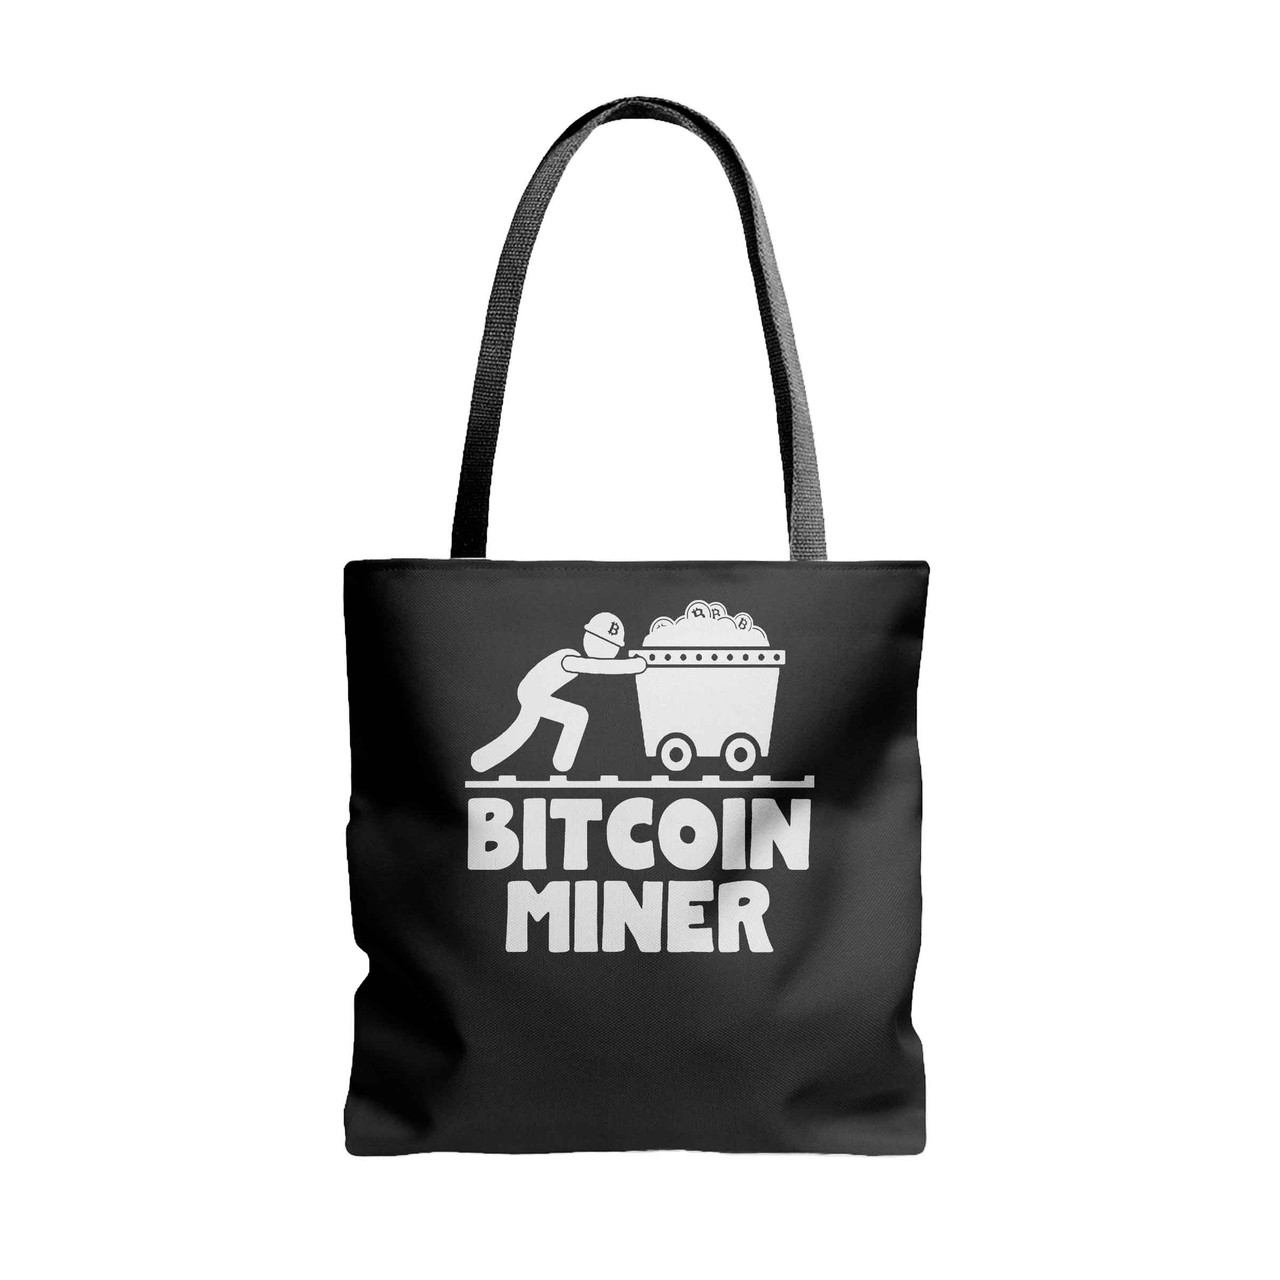 Sign And Symbol Of Cryptocurrency Bitcoin On A Thick Bag Stock Photo -  Download Image Now - iStock